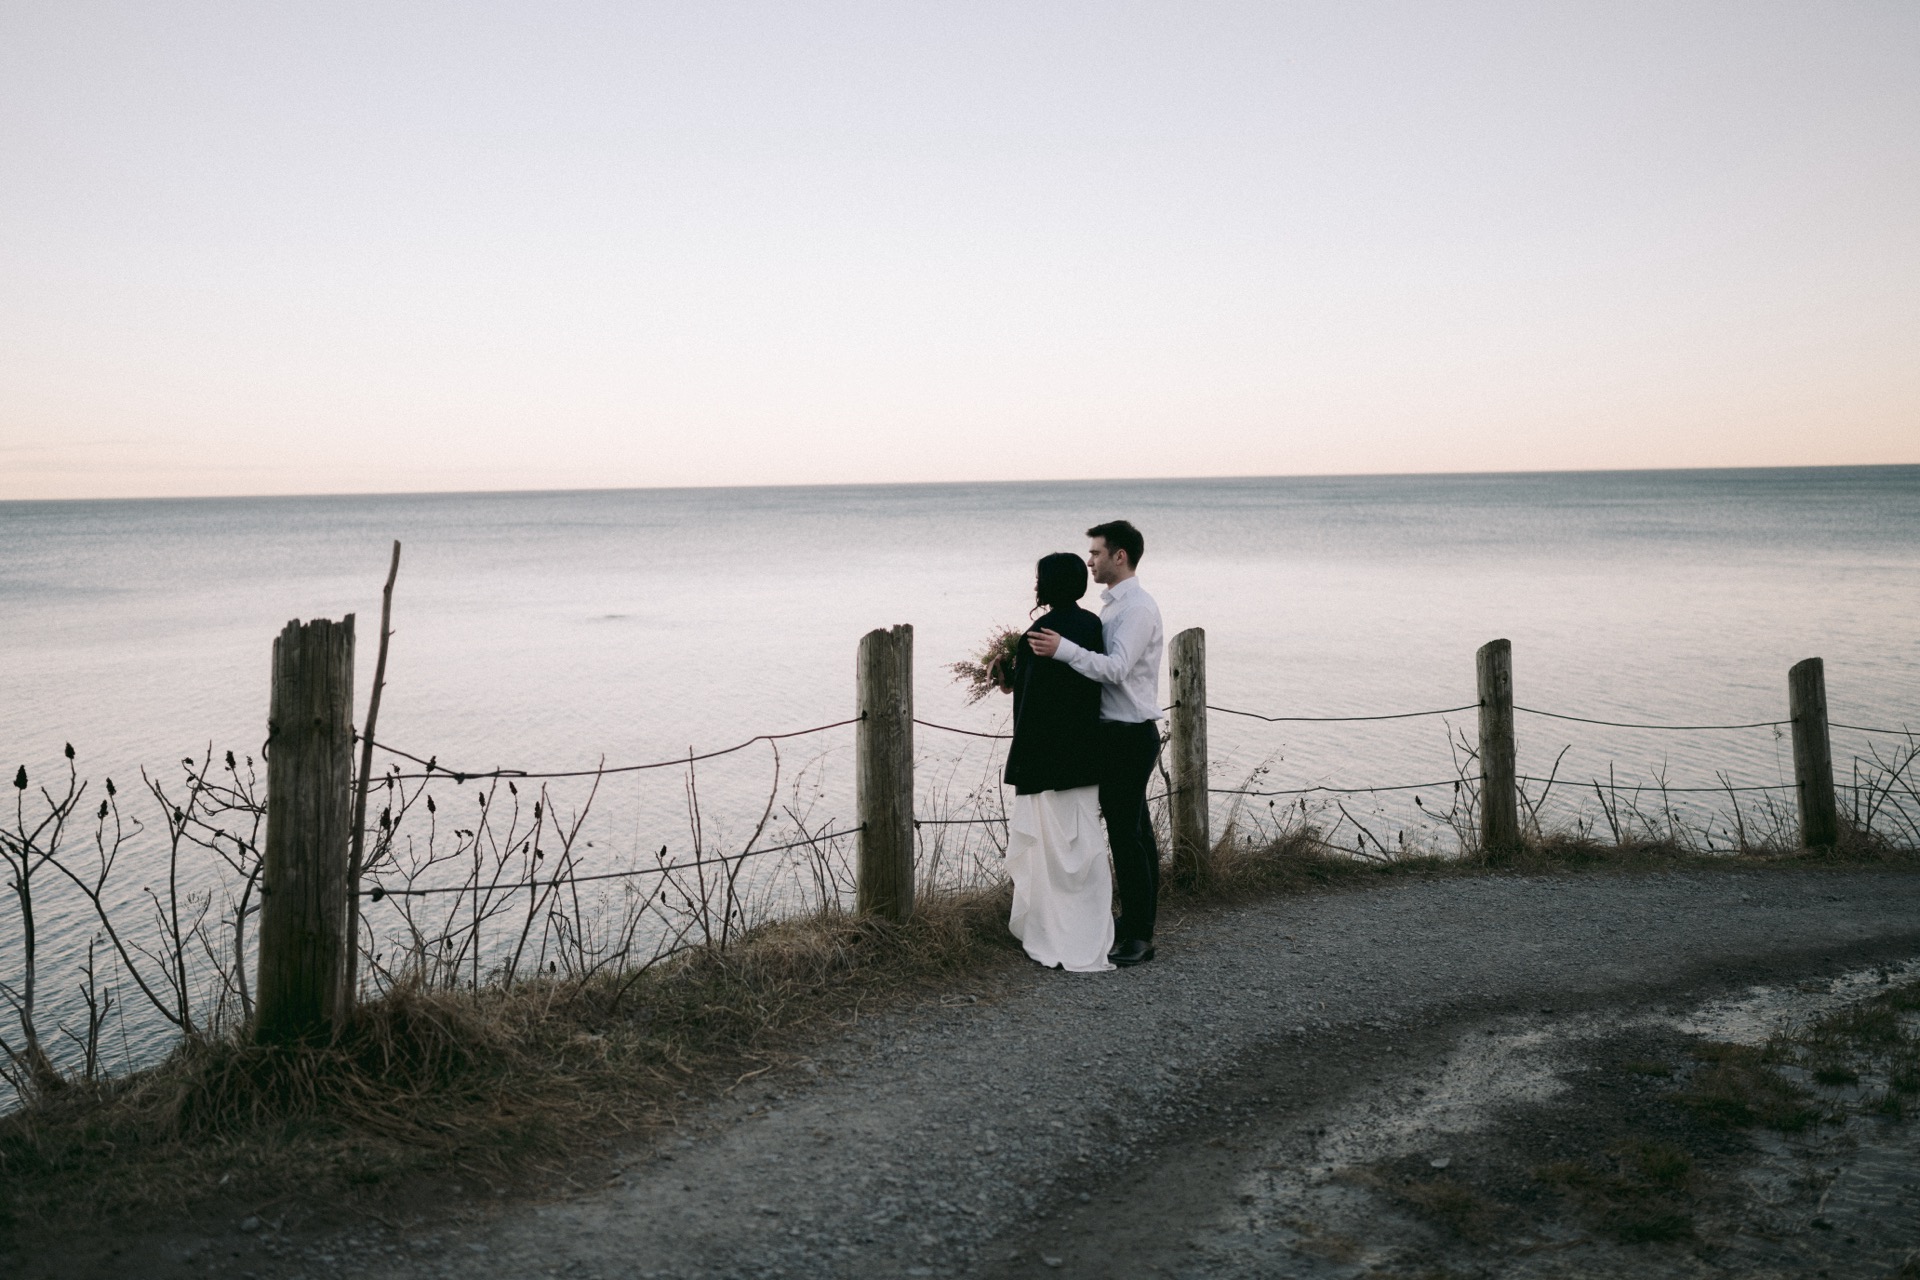 Couple enjoy the sunset view at Scarborough, Ontario after their wedding ceremony